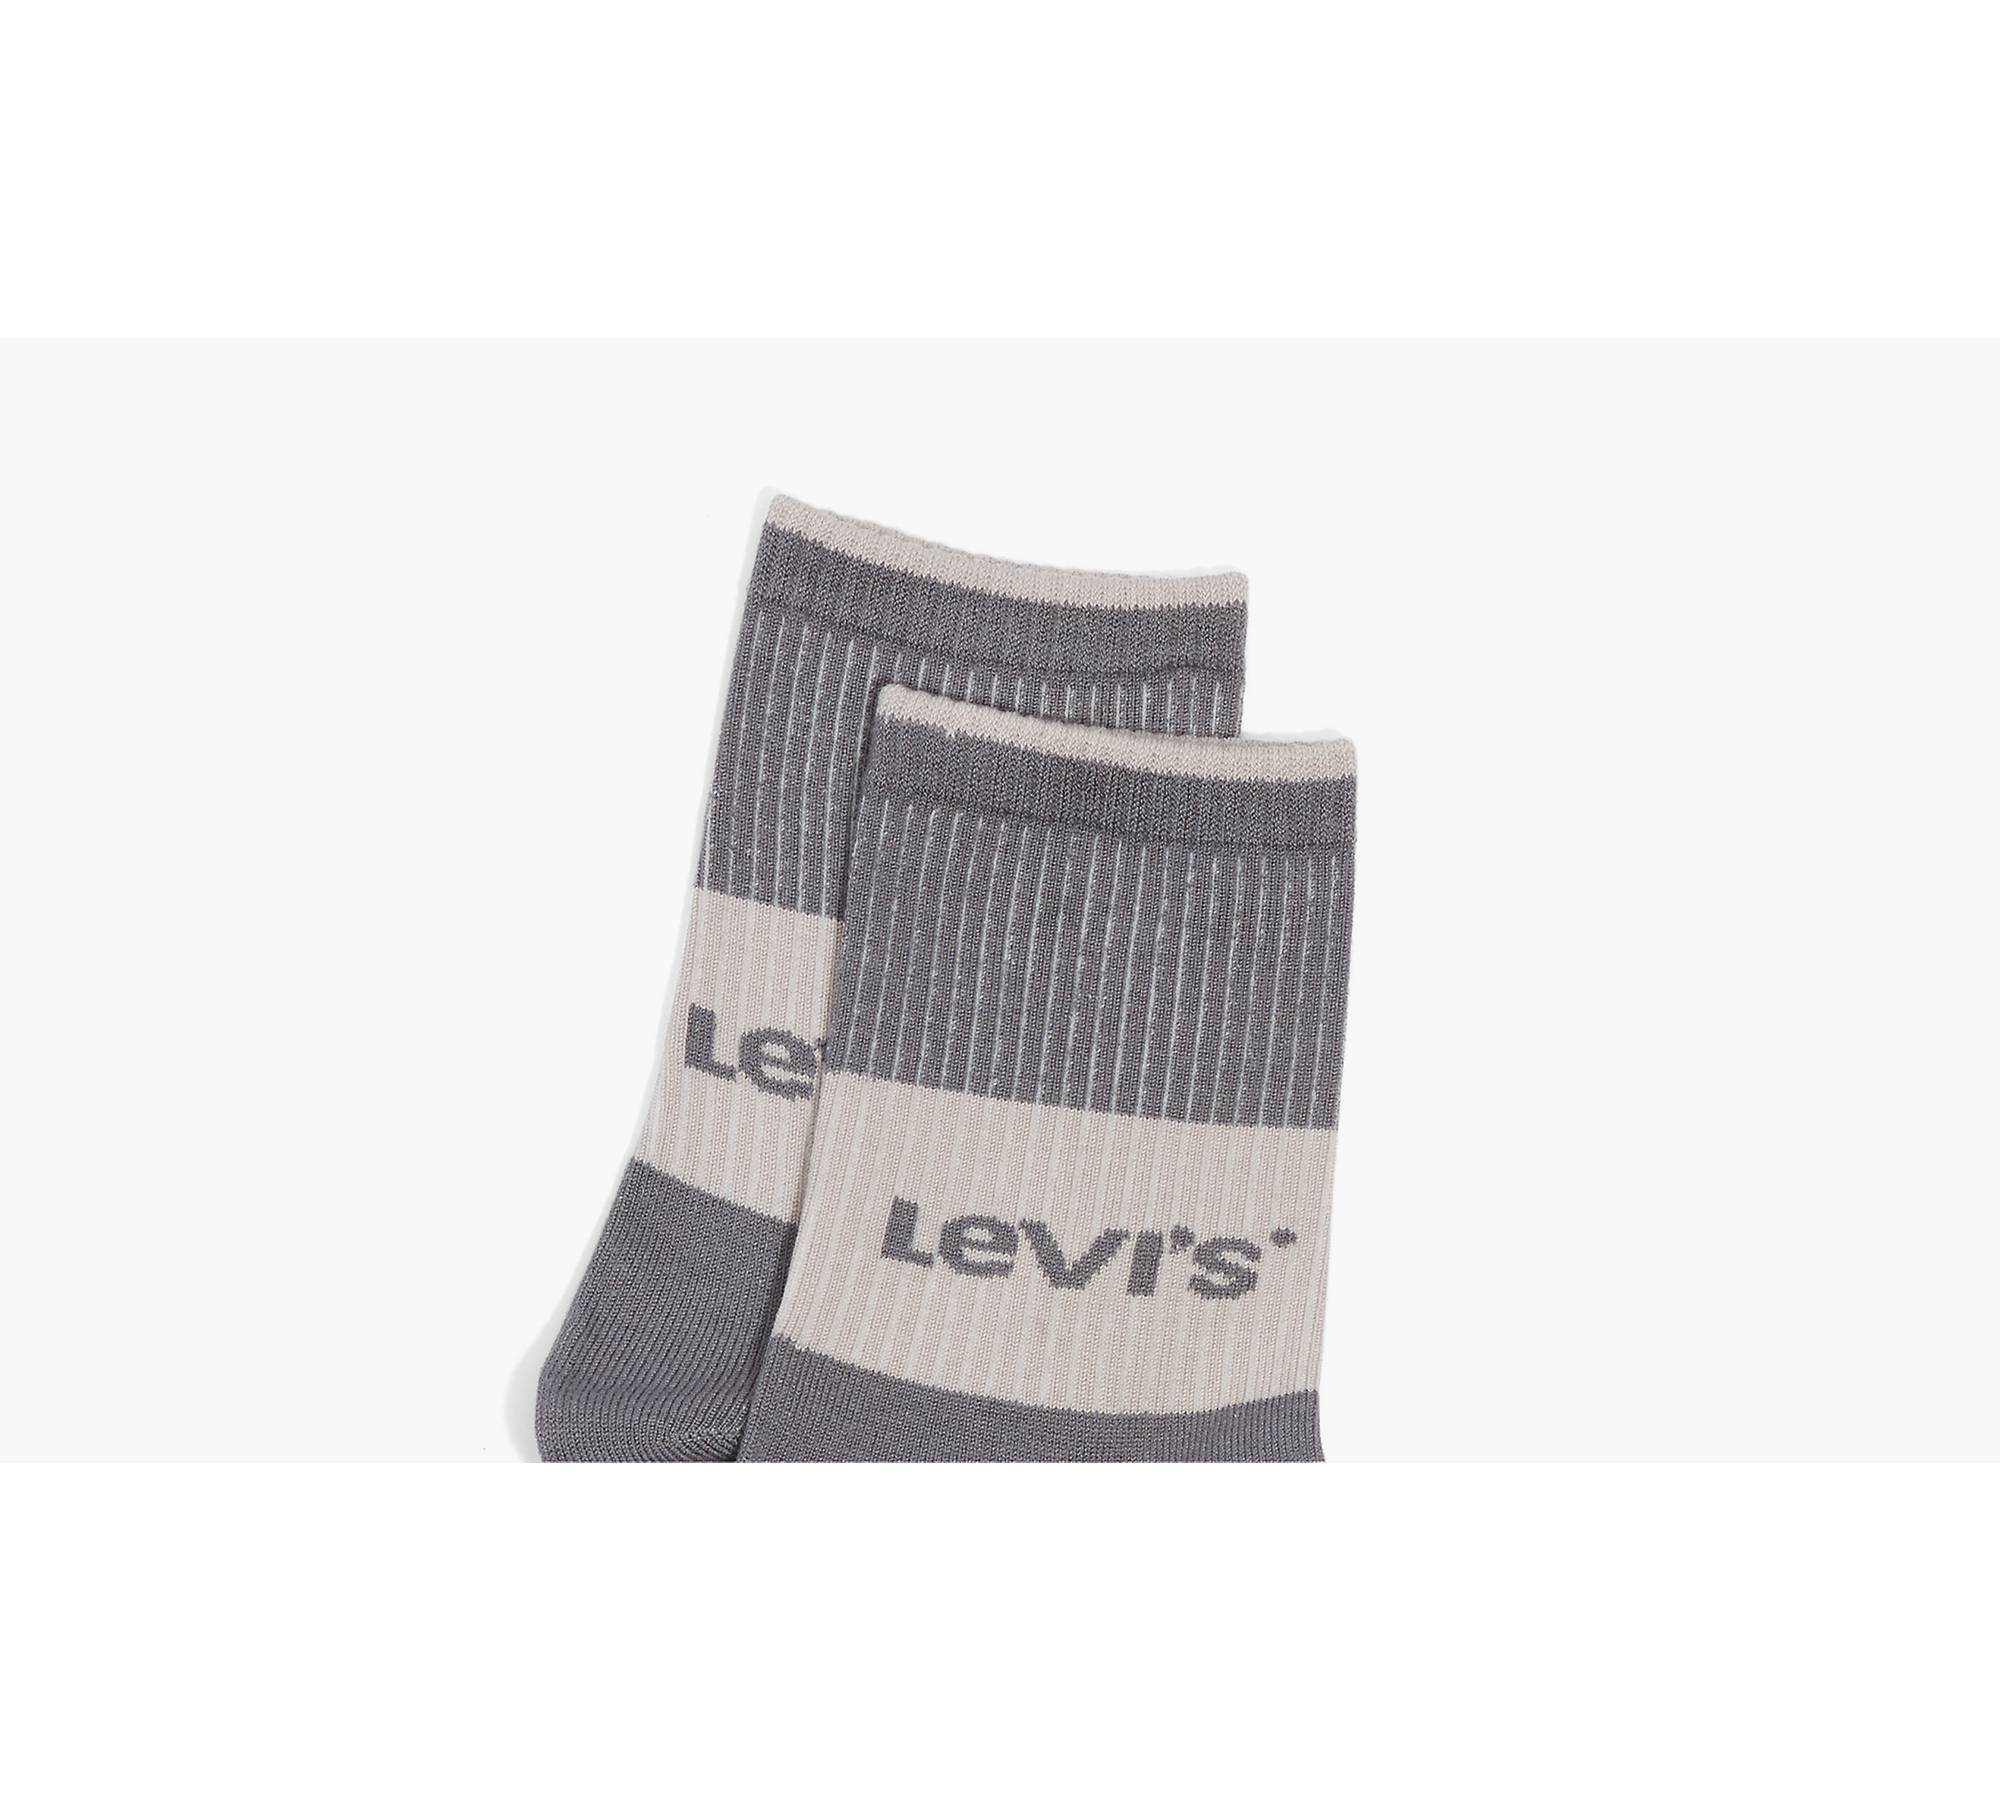 Lincoln Outfitters Men's No Show Pull Tab Sock 3 Pack Grey - L3/72542-G-L